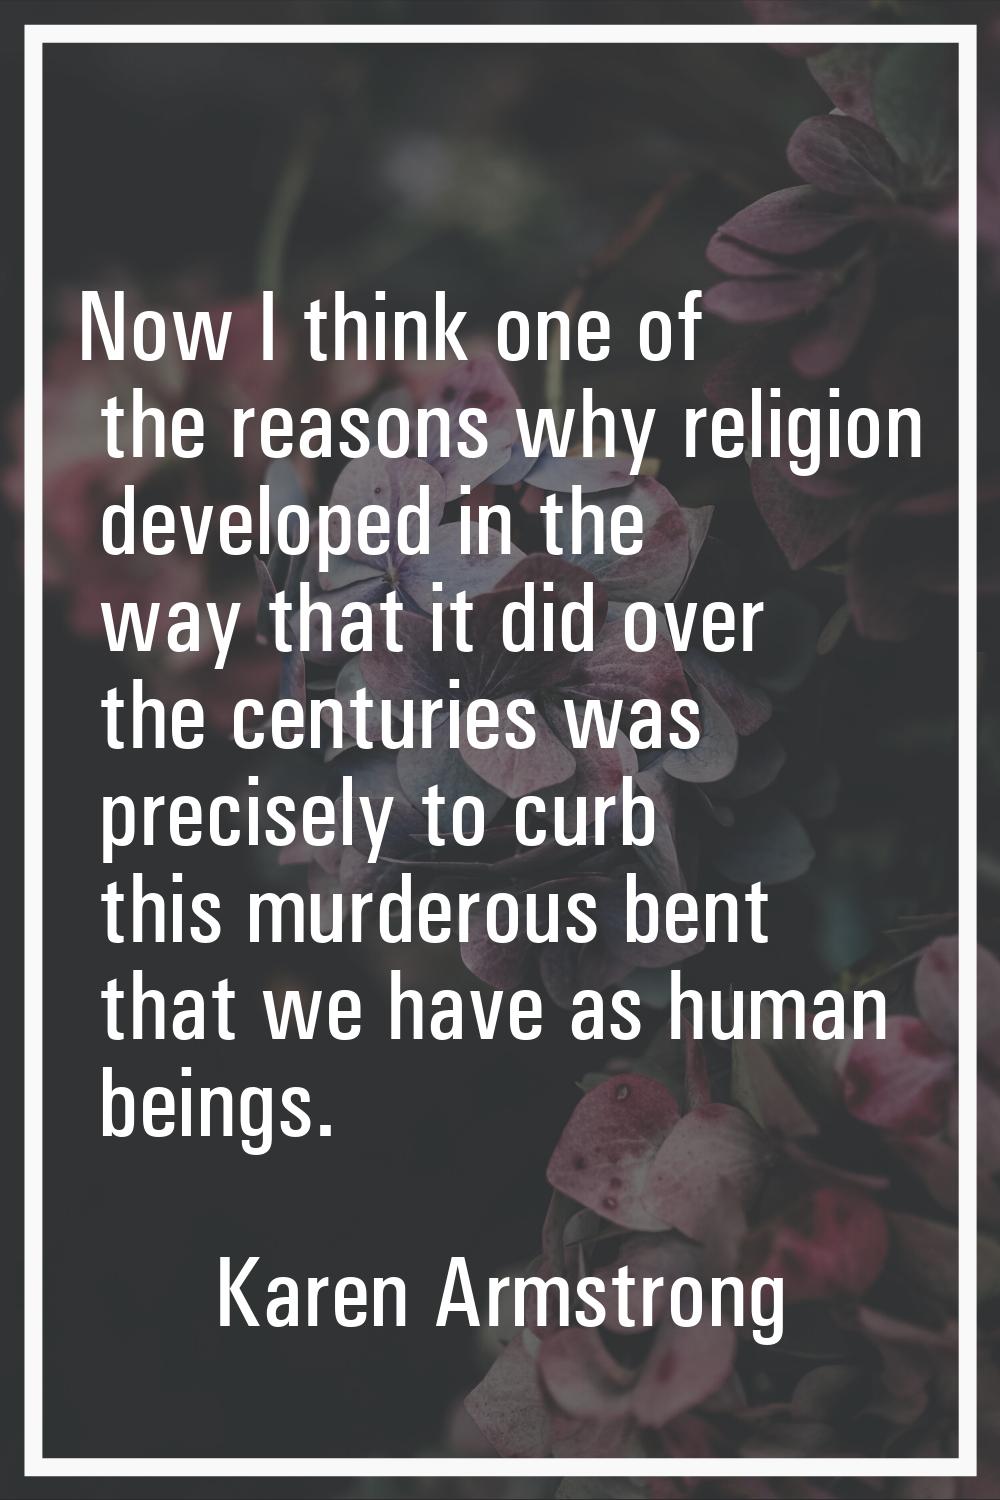 Now I think one of the reasons why religion developed in the way that it did over the centuries was